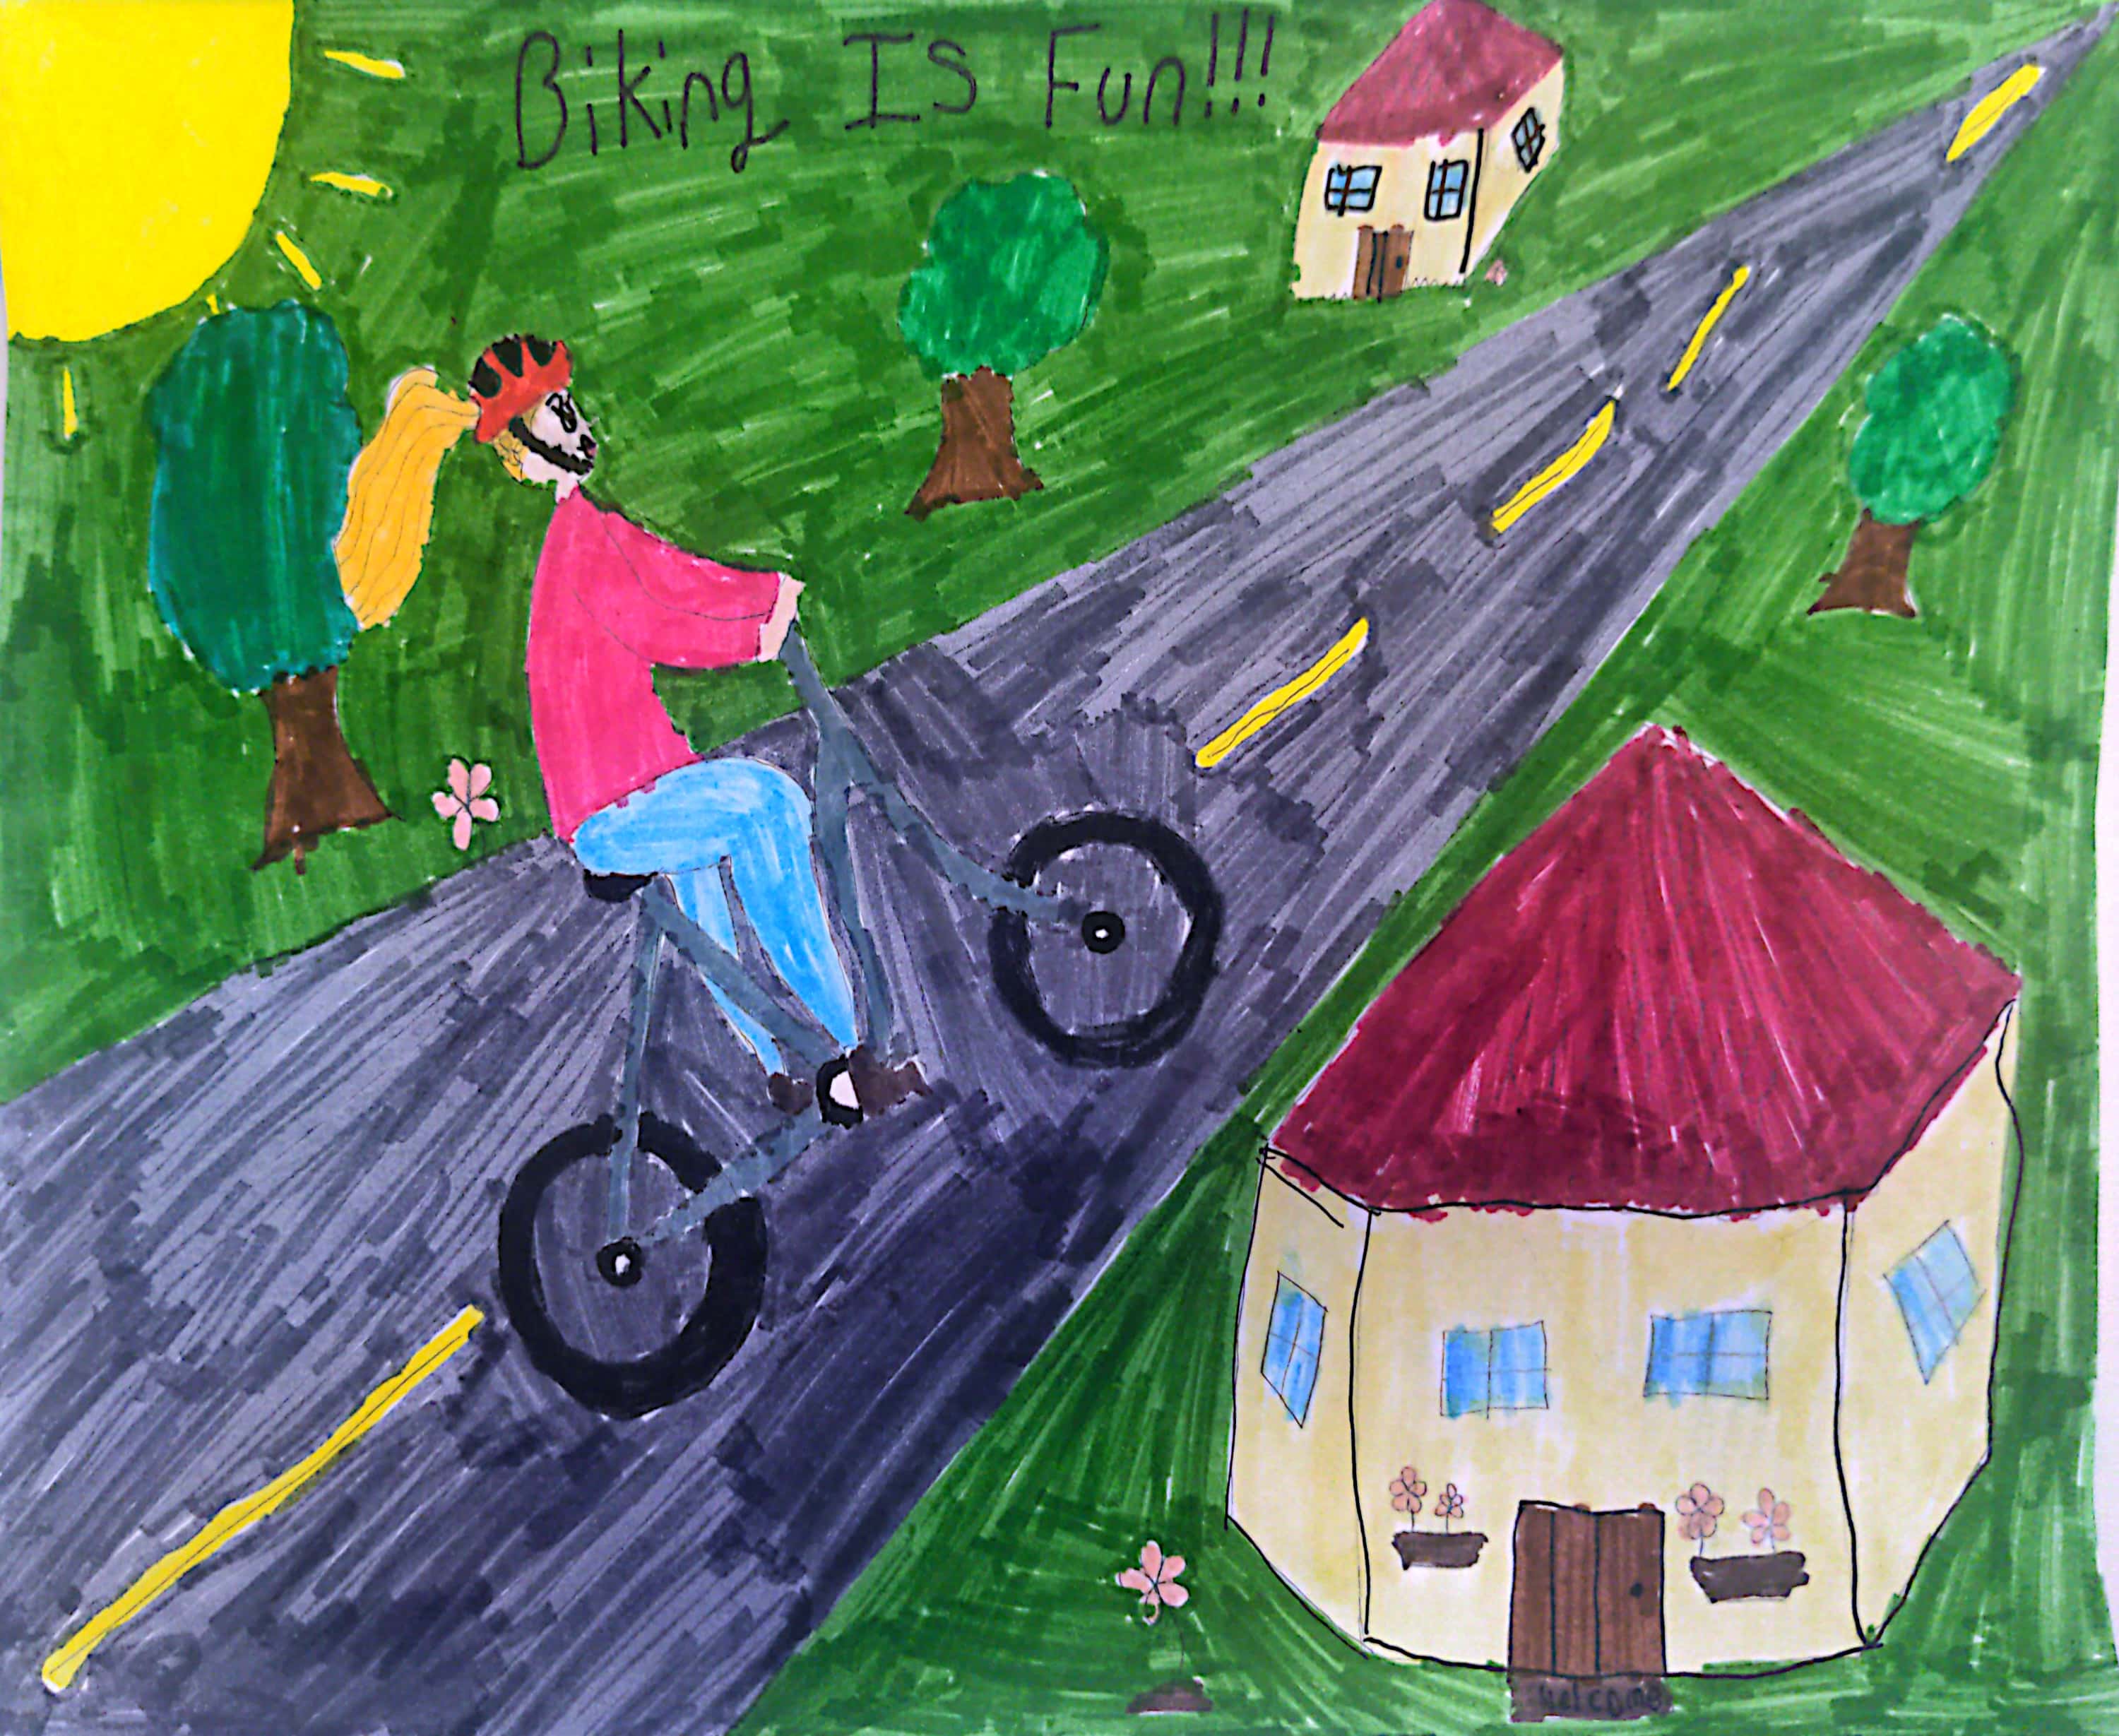 Student artwork fully colored page showing perspective drawing of biker with long blonde hair, red helmet, pink shirt and blue pants riding on a bike path lined with green grass and tree. House in foreground to the right of bike path, and another house in the background to the left of the path. Sun in the upper left corner, with title 